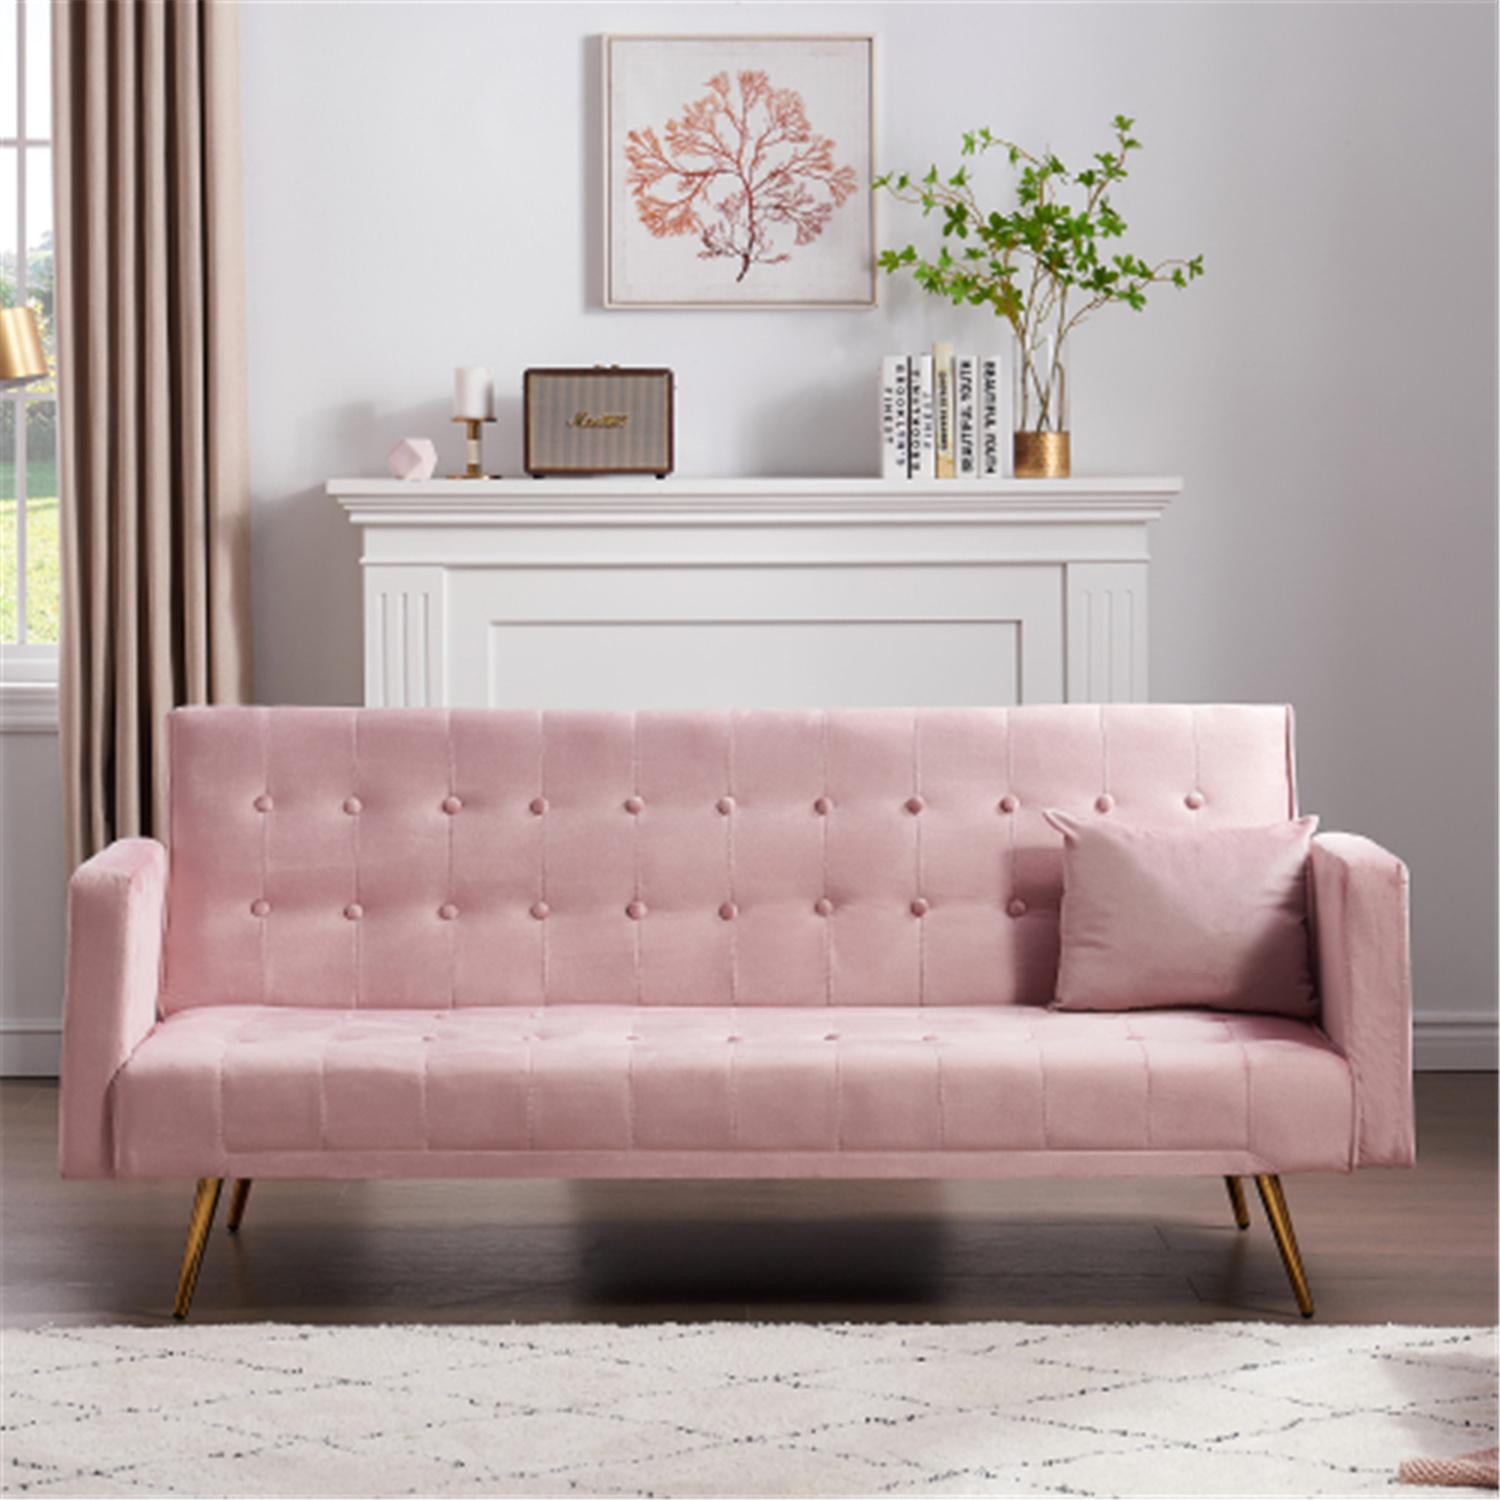 Details about   SOFA BED SLEEPER Memory Foam Pink Velvet Button-Tufted Reclinable Split Back 